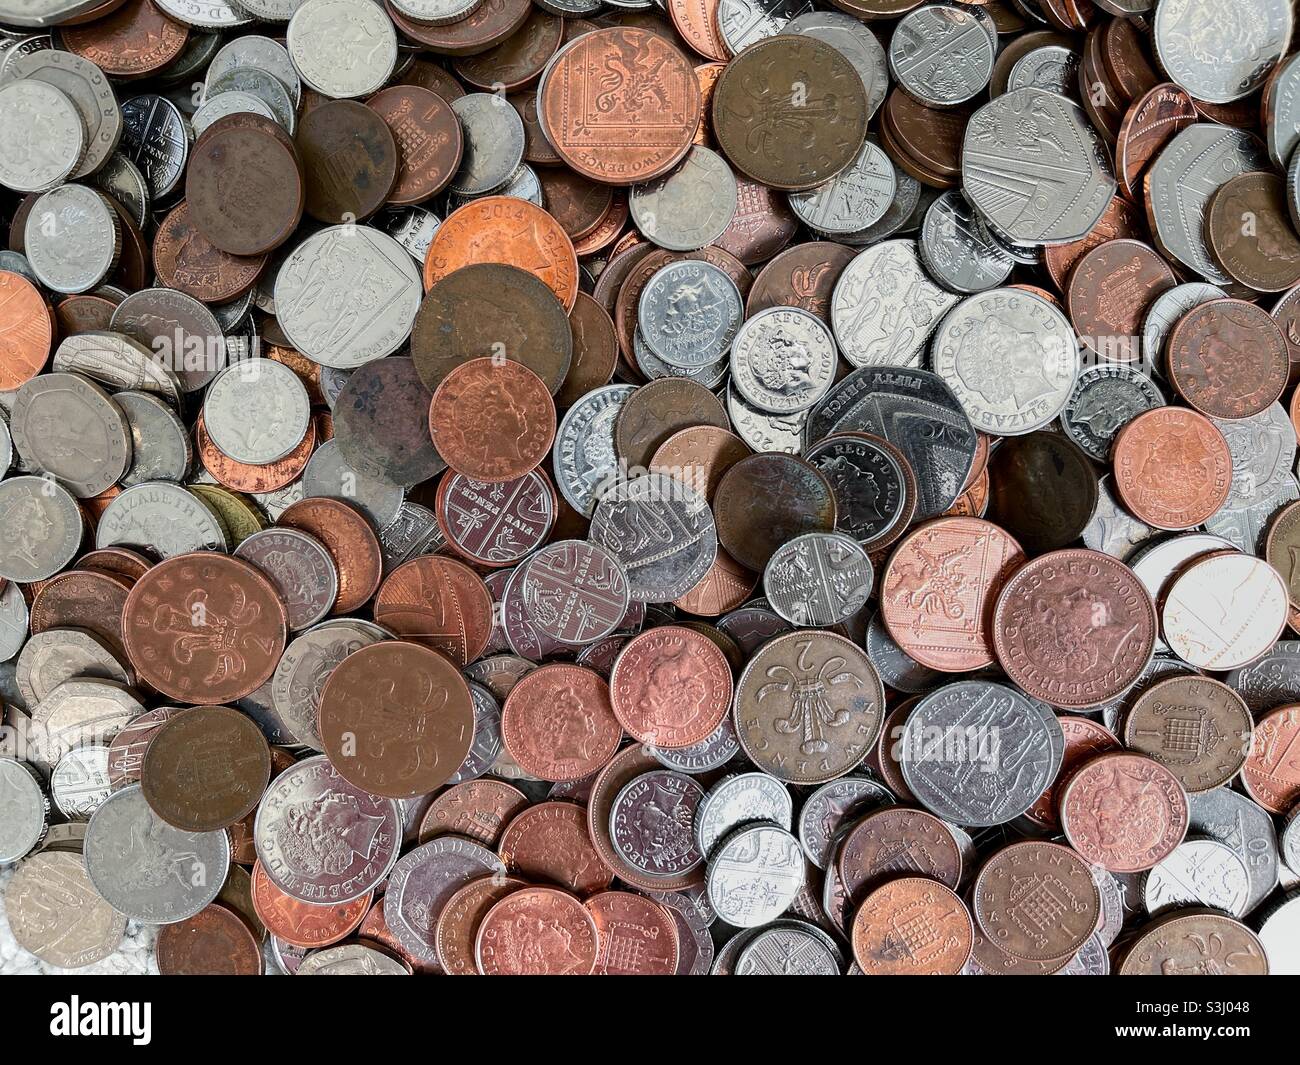 Pile of assorted British coins Stock Photo